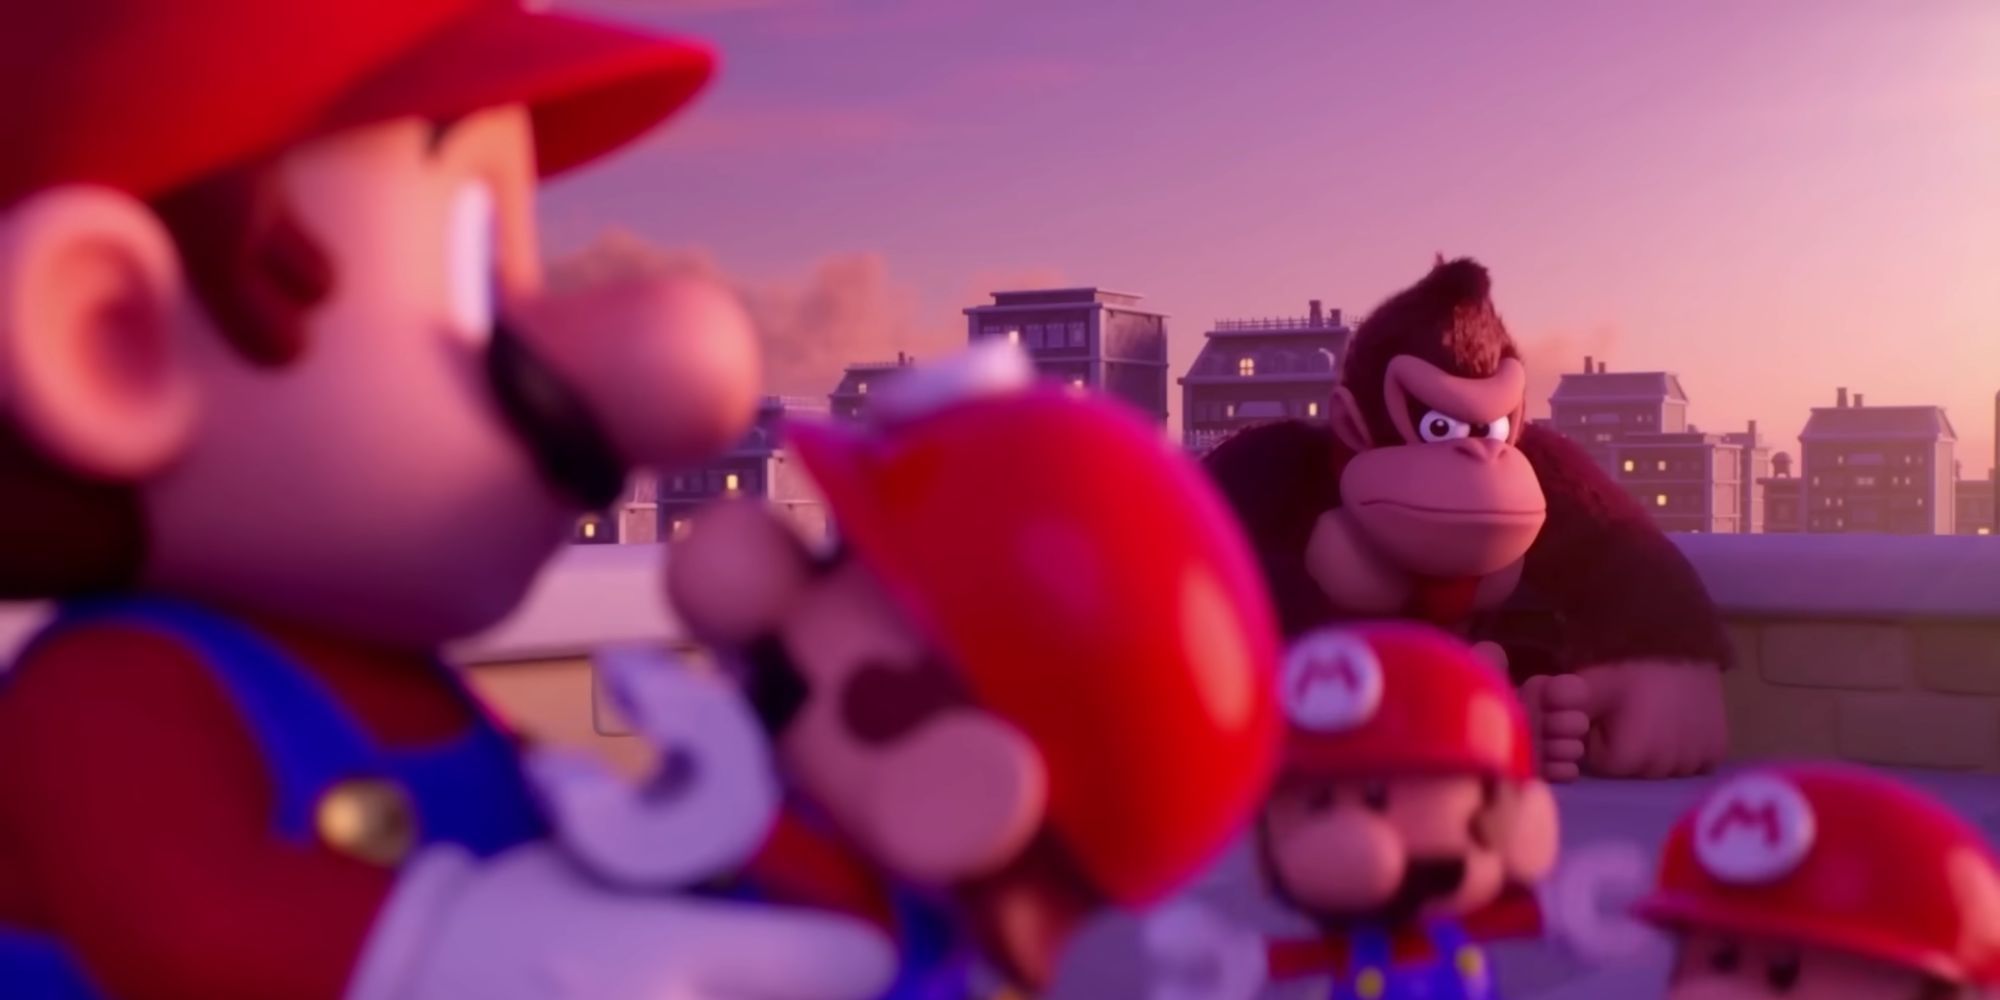 Mario looking at a toy while Donkey Kong looks sad in the Mario vs. Donkey Kong remake ending.